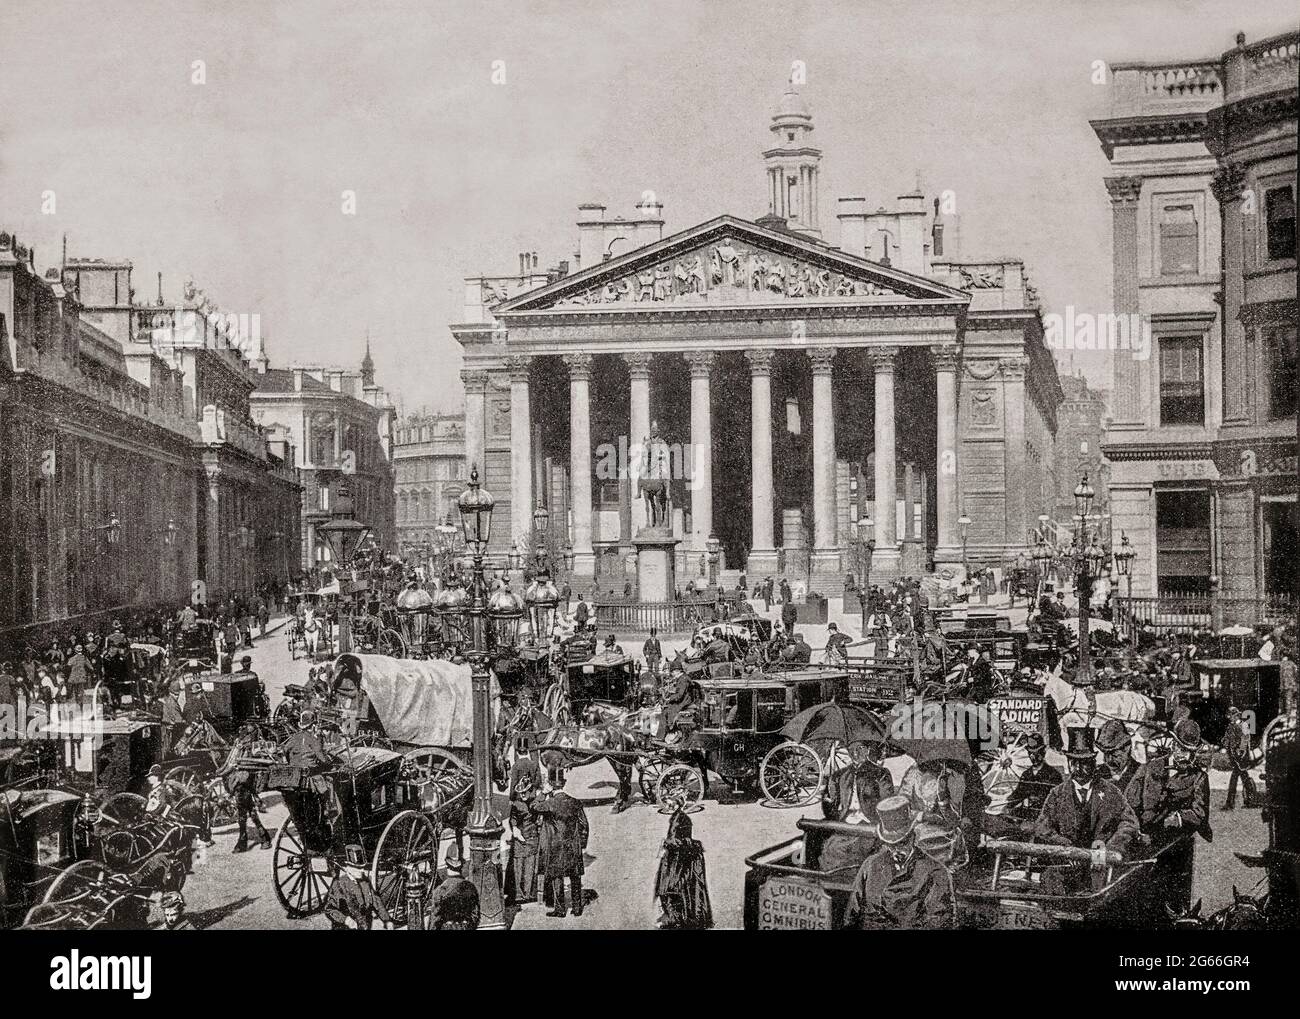 A late 19th century view of early traffic congestion outside the Royal Exchange in London, England, founded in the 16th century by the merchant Sir Thomas Gresham on the suggestion of his factor Richard Clough to act as a centre of commerce for the City of London. It has twice been destroyed by fire and subsequently rebuilt, the present building being designed by Sir William Tite in the 1840s. The site was notably occupied by the Lloyd's insurance market for nearly 150 years. Stock Photo